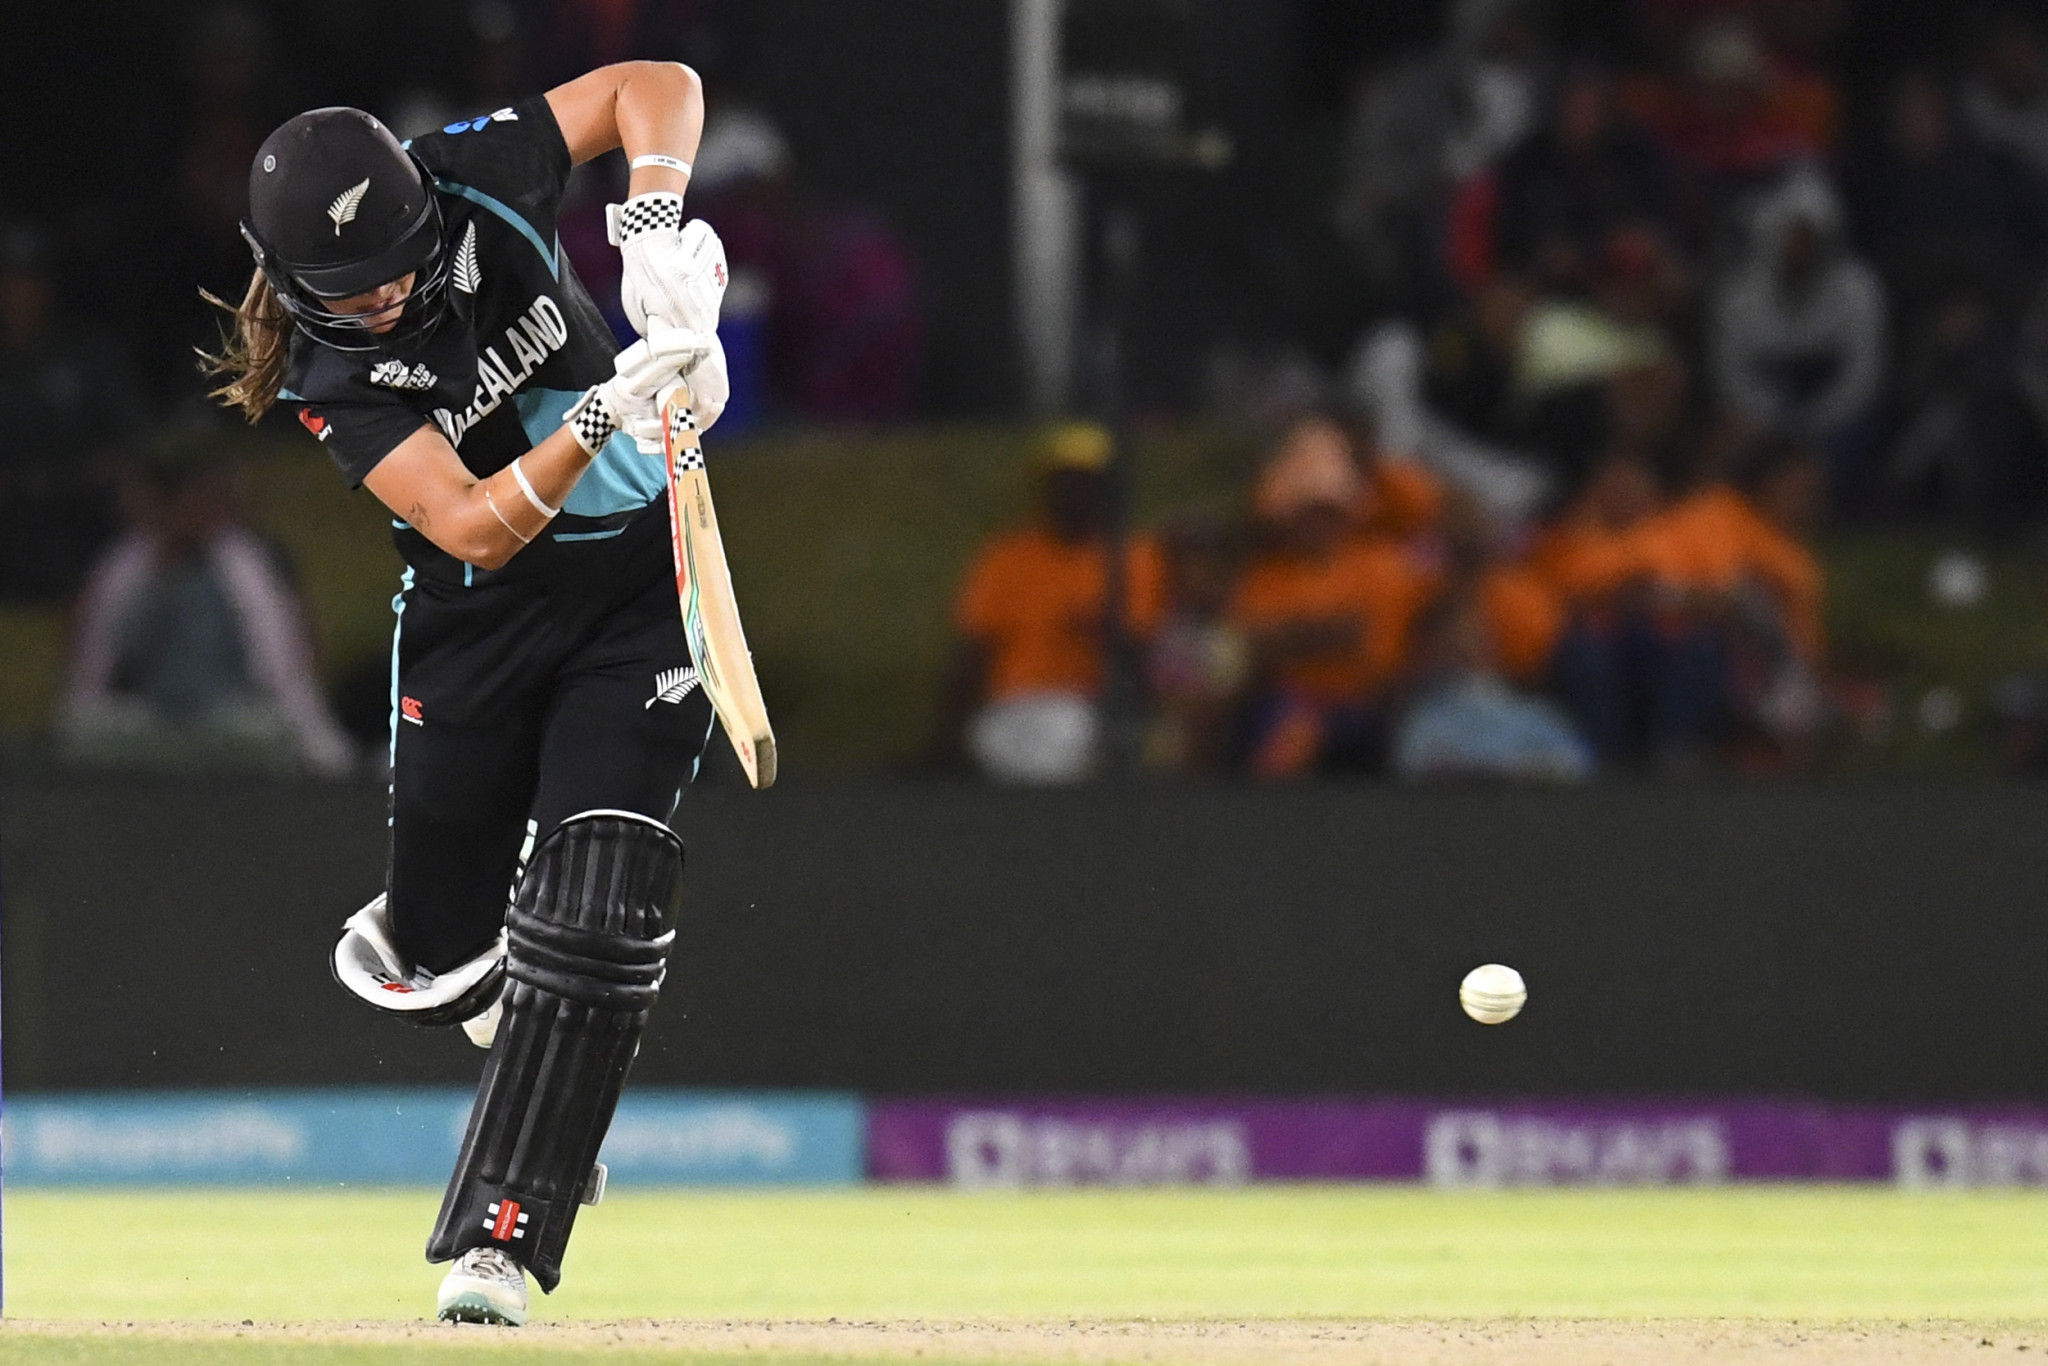 Amelia Kerr top scored with 66 with the bat and took two wickets with the ball as New Zealand beat Sri Lanka by 102 runs in Paarl ©Getty Images